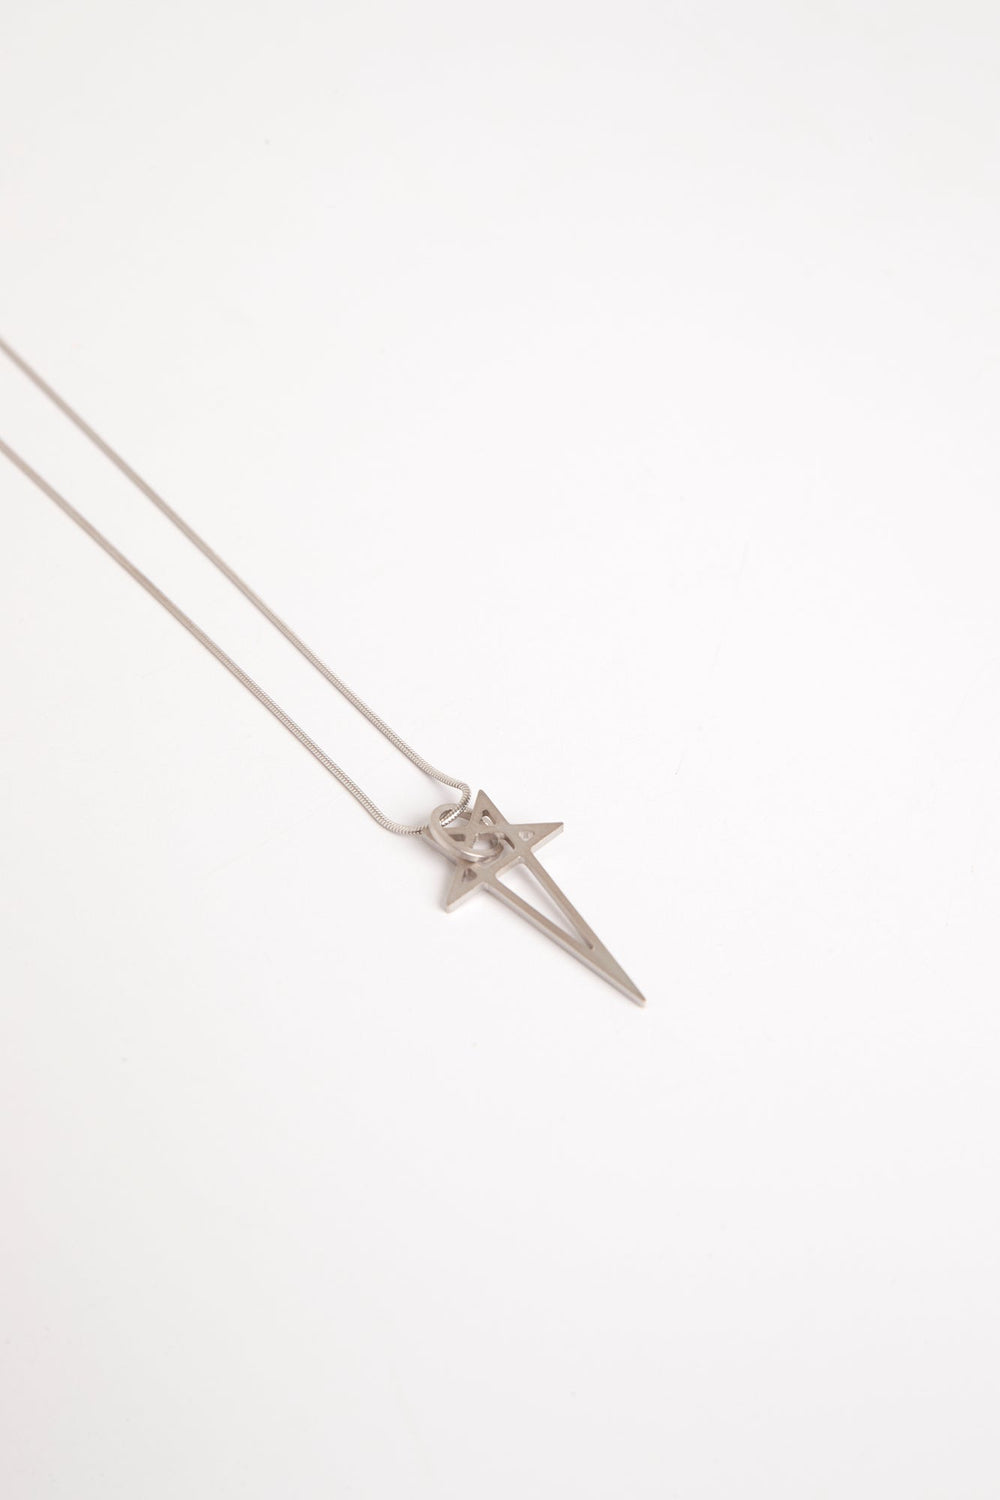 Rick Owens Pentagram Chain Necklace In Gray | ModeSens